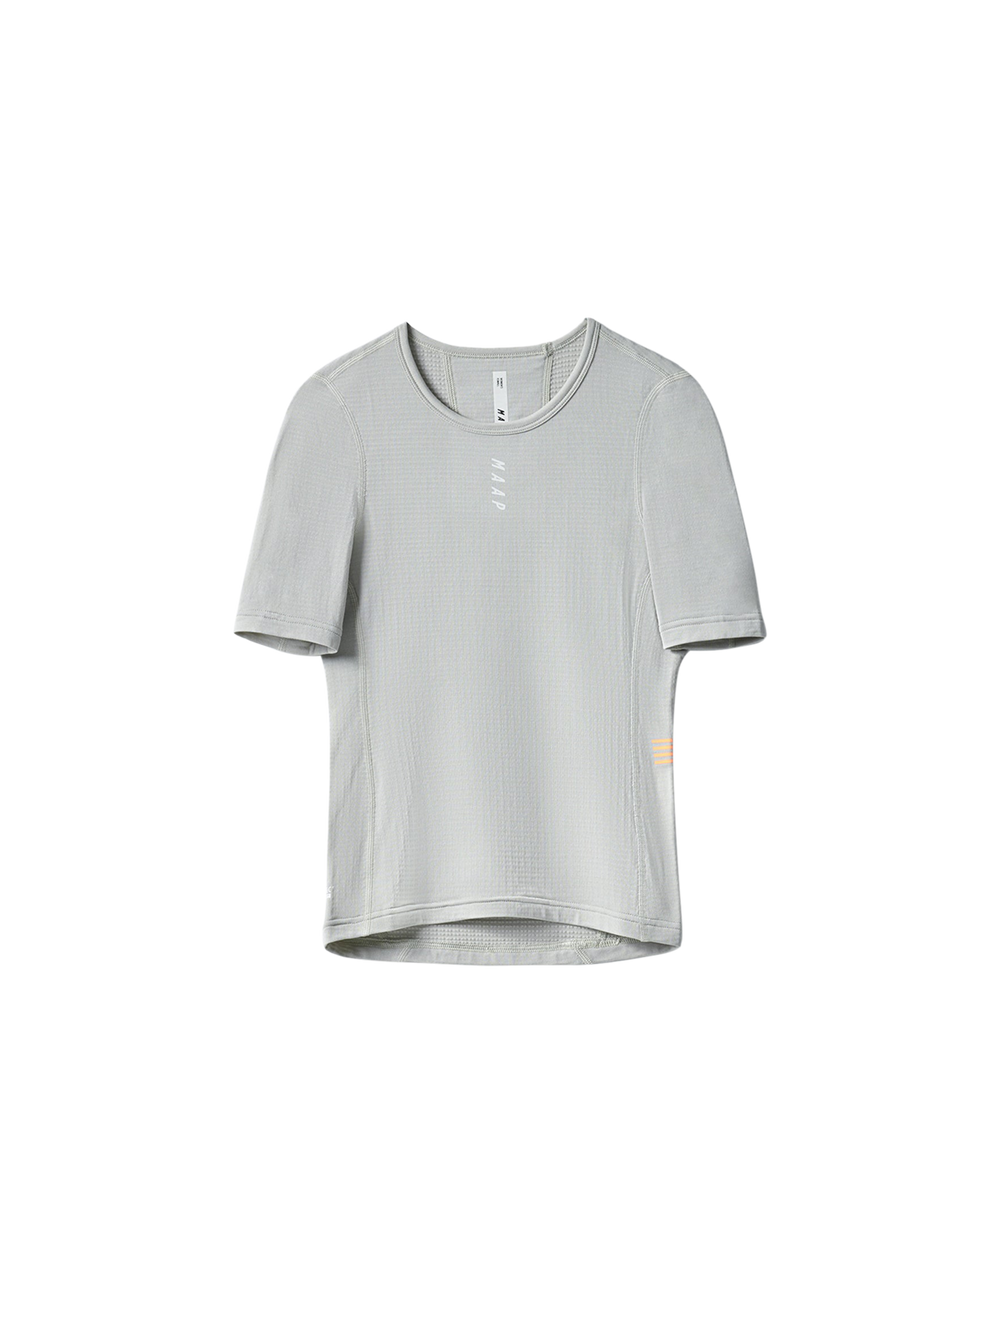 Product Image for Women's Thermal Base Layer Tee